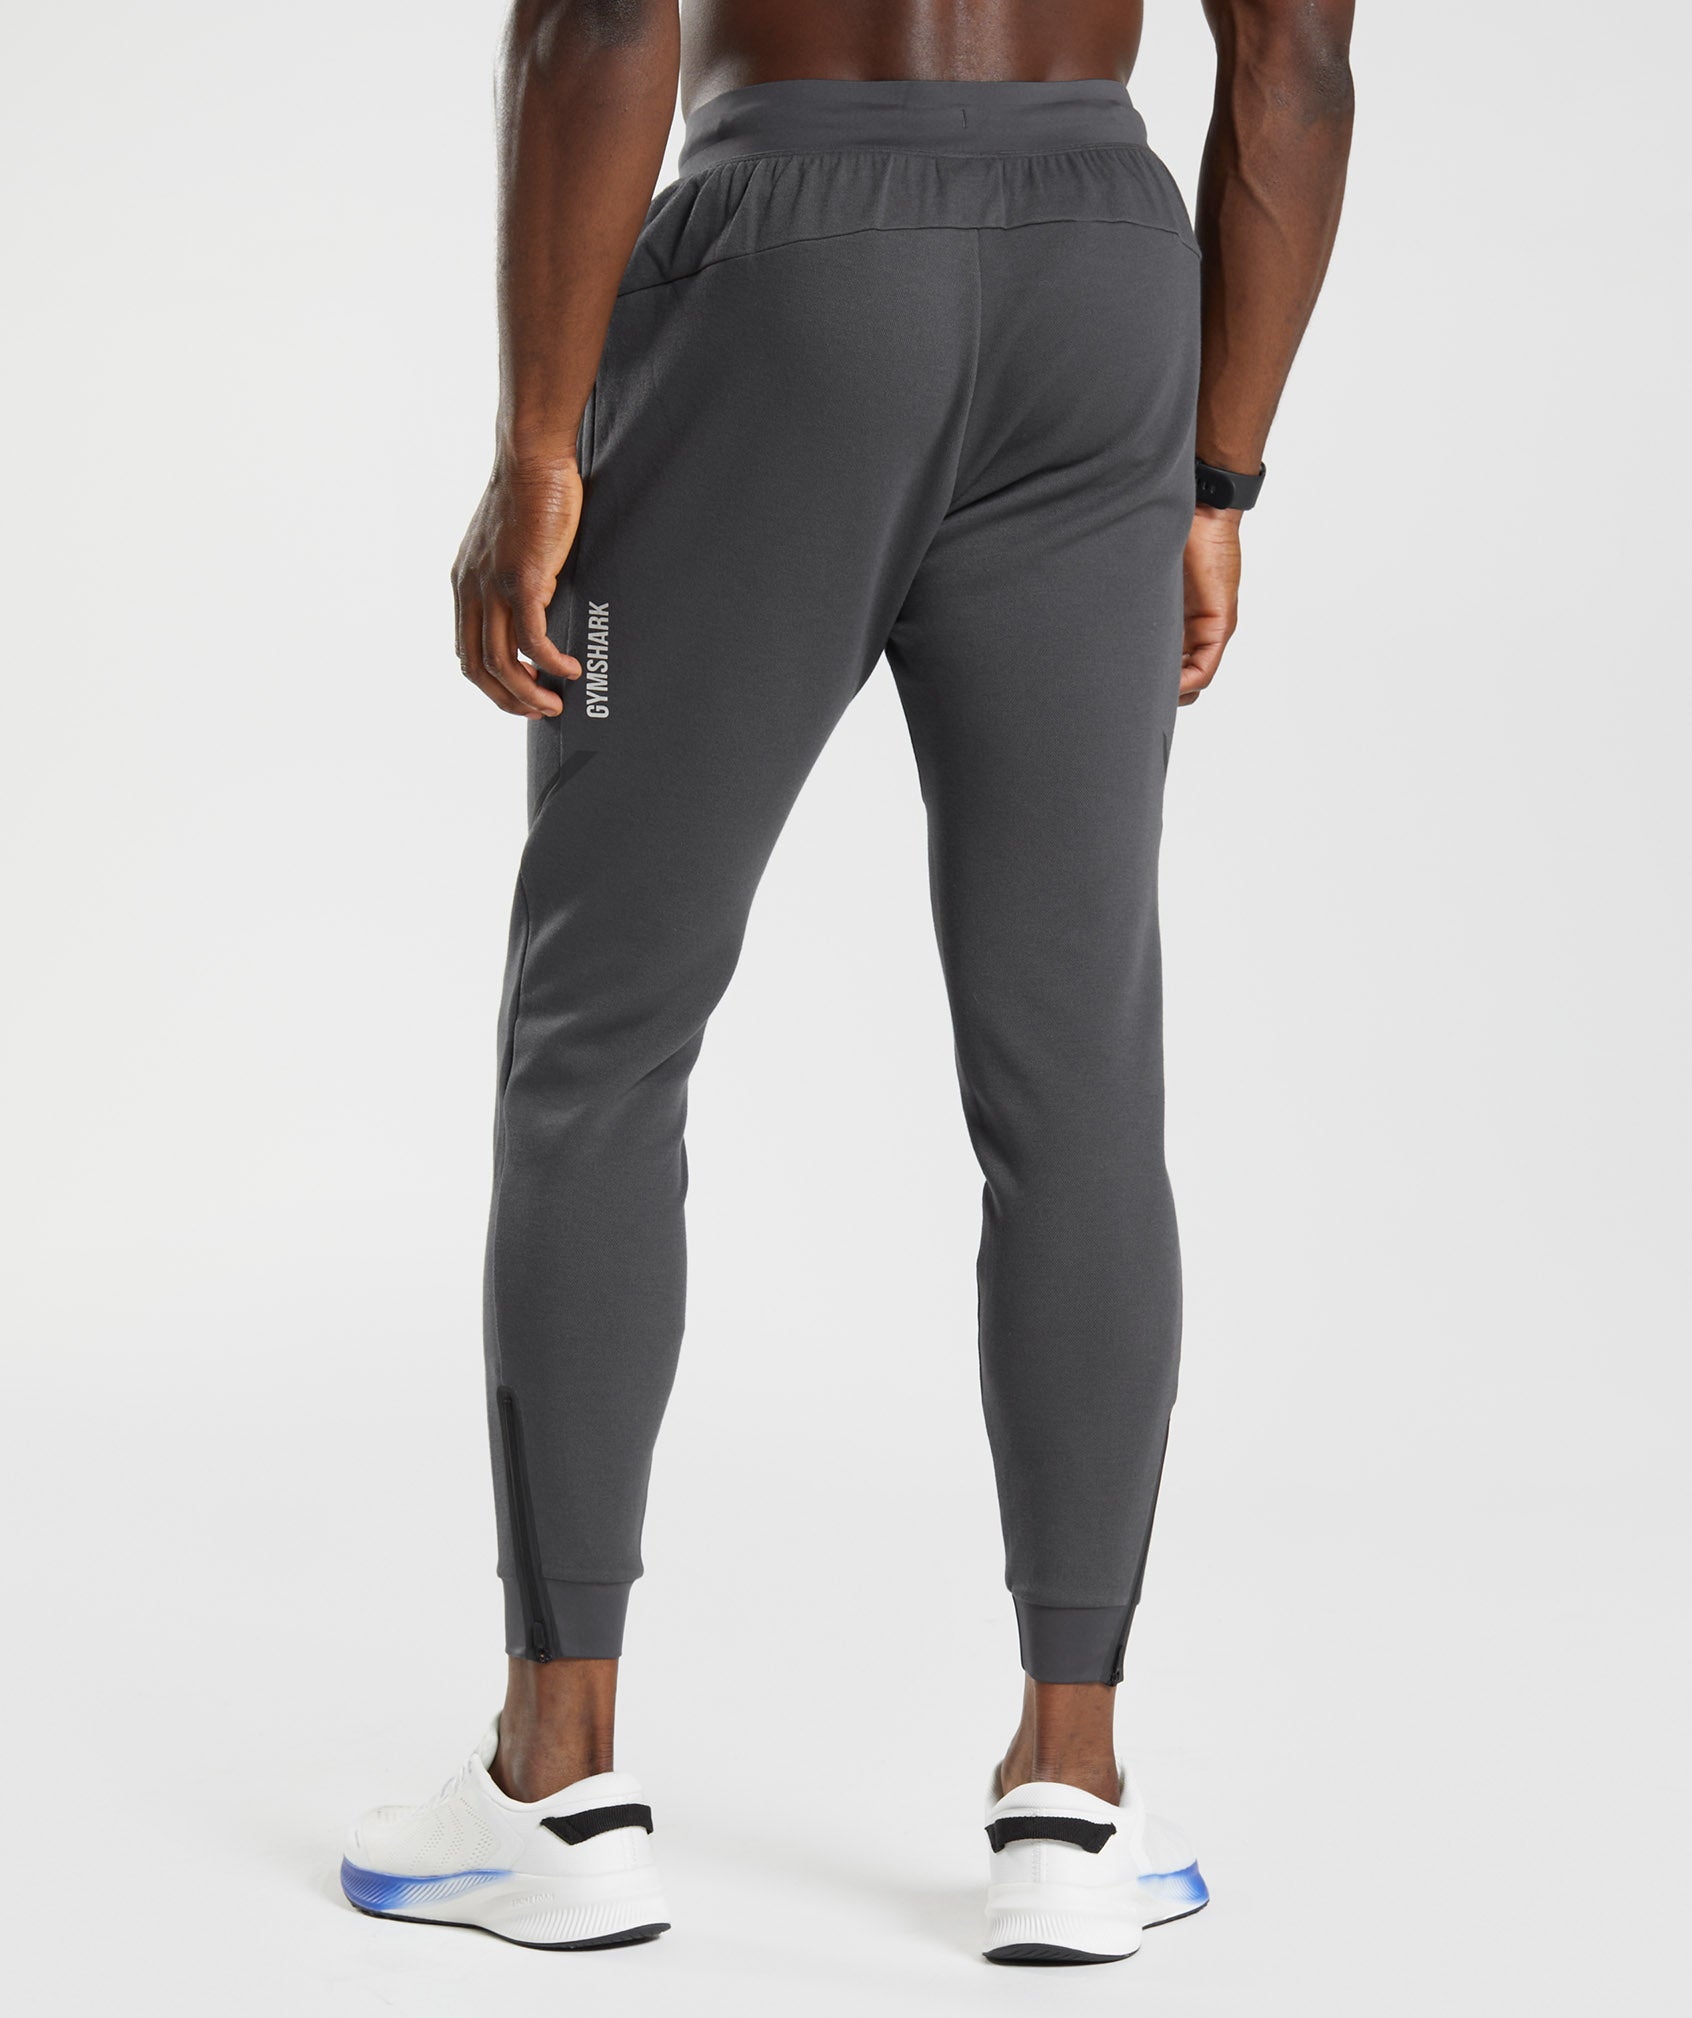 Apex Technical Joggers in Silhouette Grey - view 2